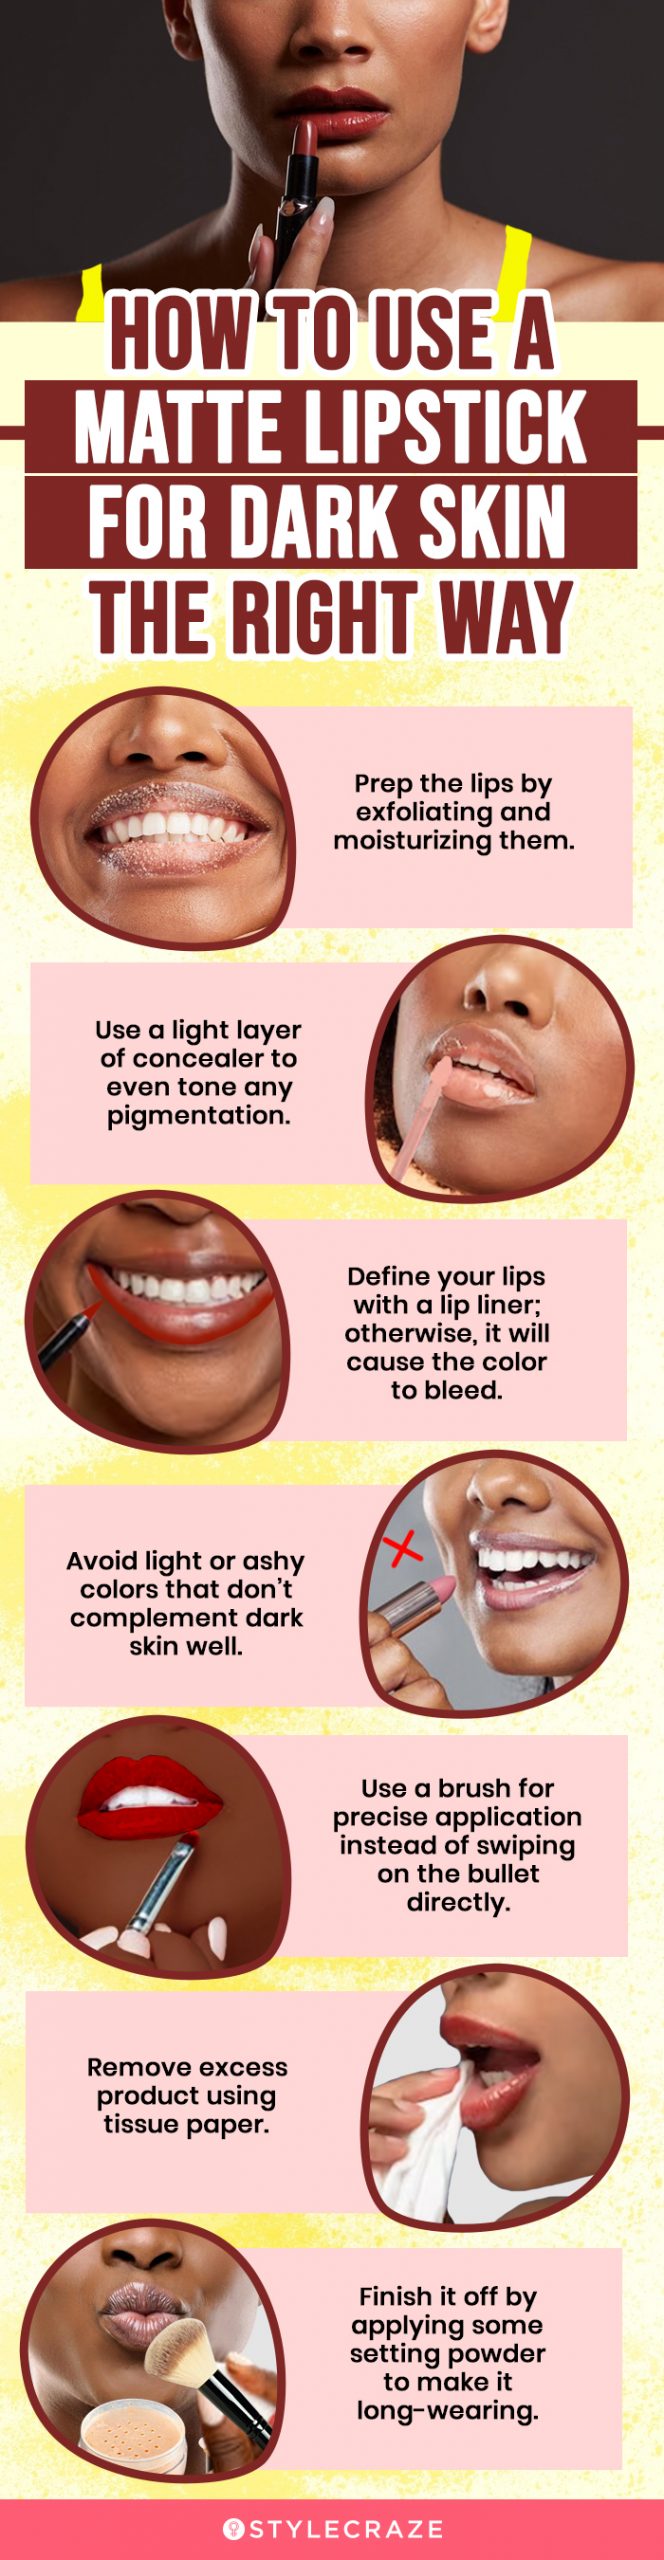 How To Use A Matte Lipstick For Dark Skin (infographic)